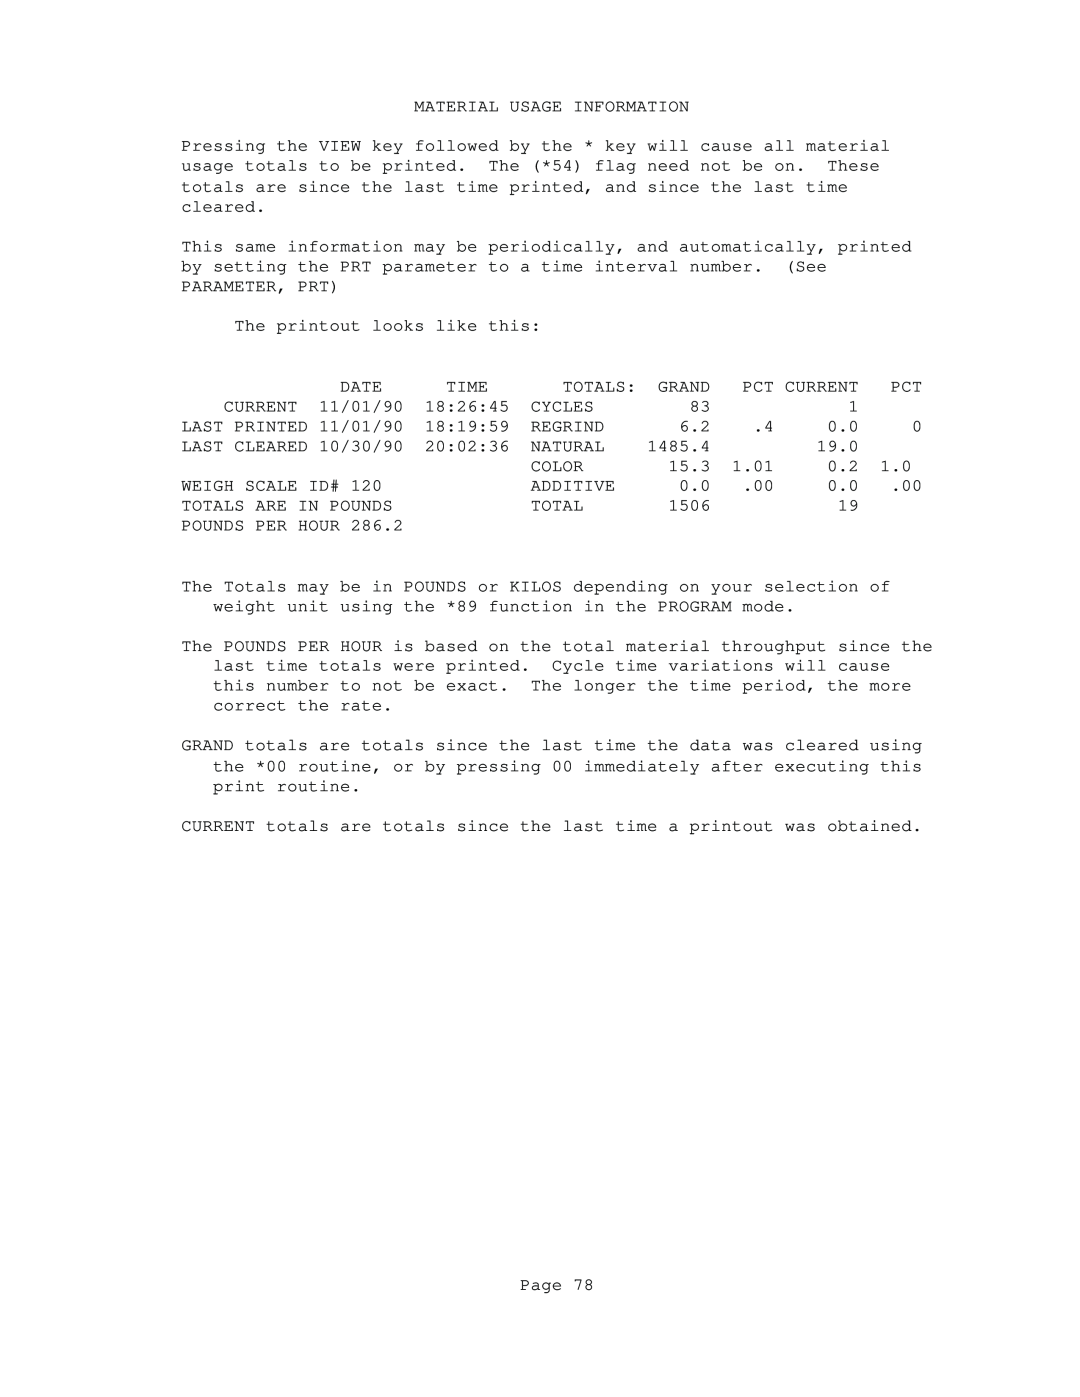 Conair GB/ WSB Material Usage Information, PARAMETER, PRT The printout looks like this, Date, Time, Totals, Grand, Cycles 